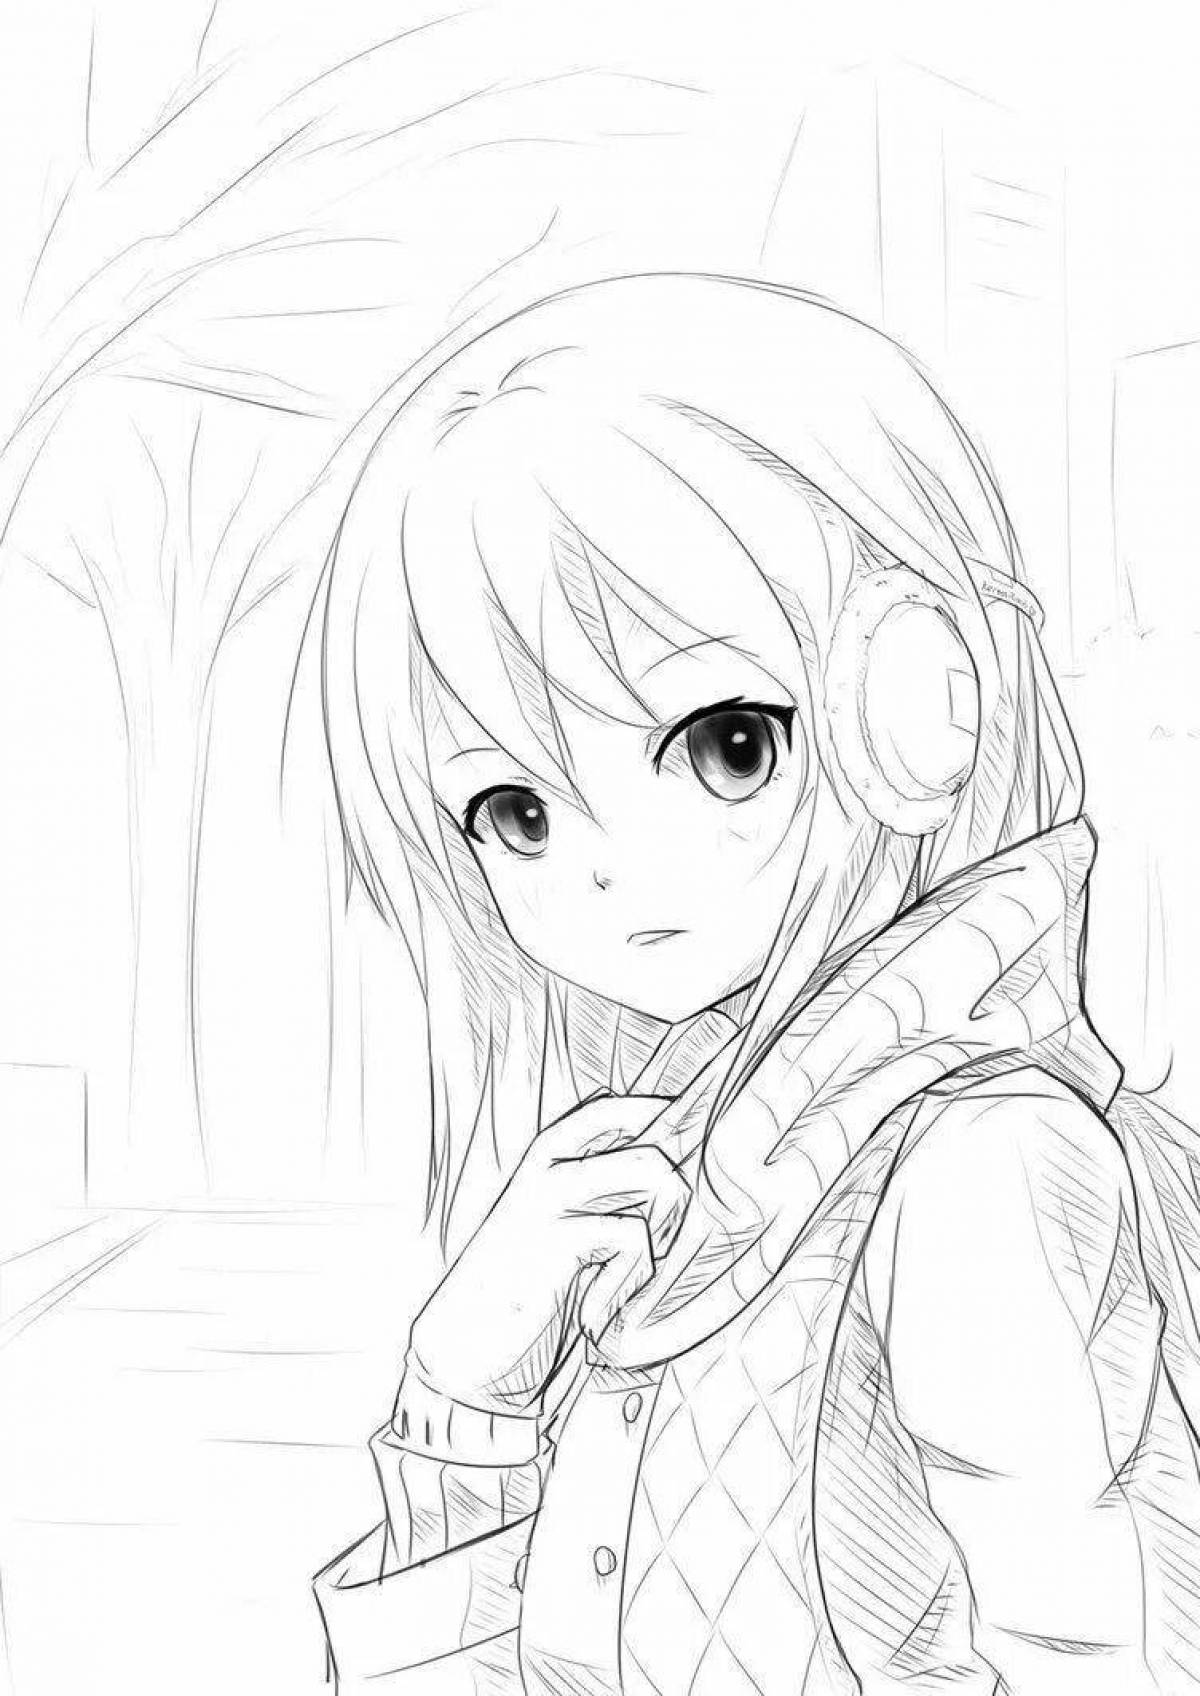 Exciting coloring book girl with headphones